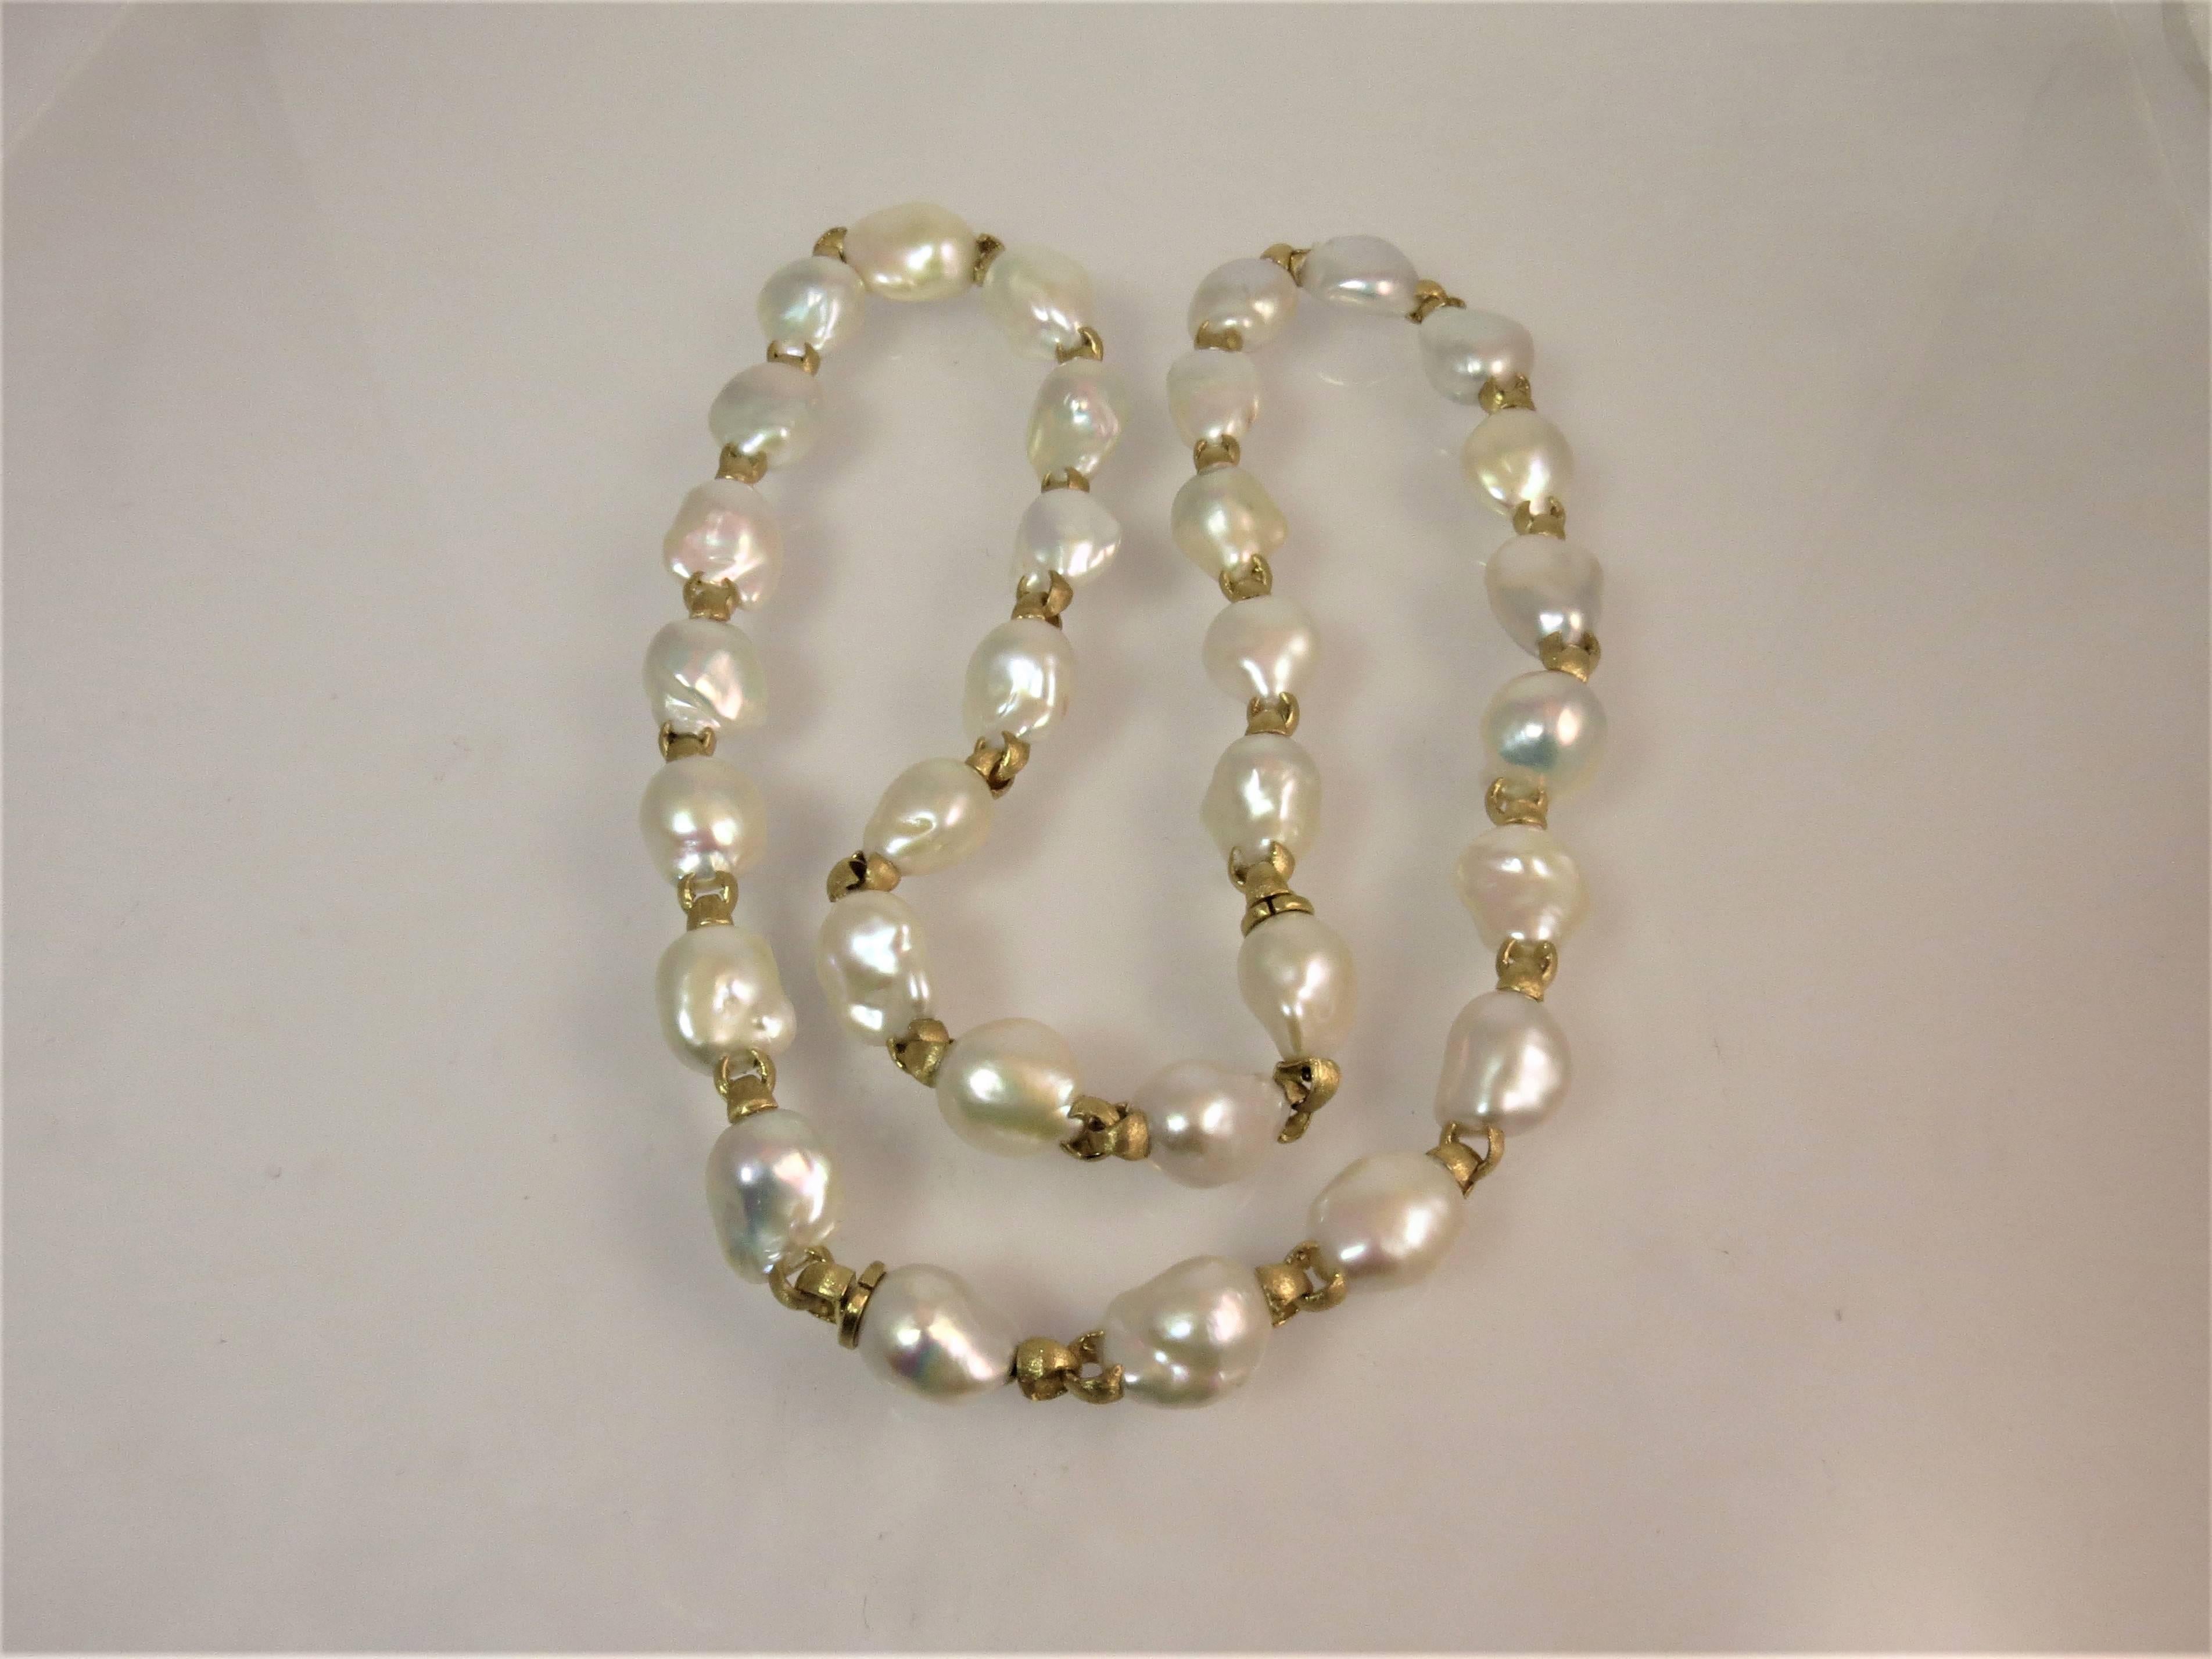 Yvel 18K brushed yellow gold link necklace, 32 inches long with 32 fresh water Baroque pearls, pearl size 20mmX15mm.